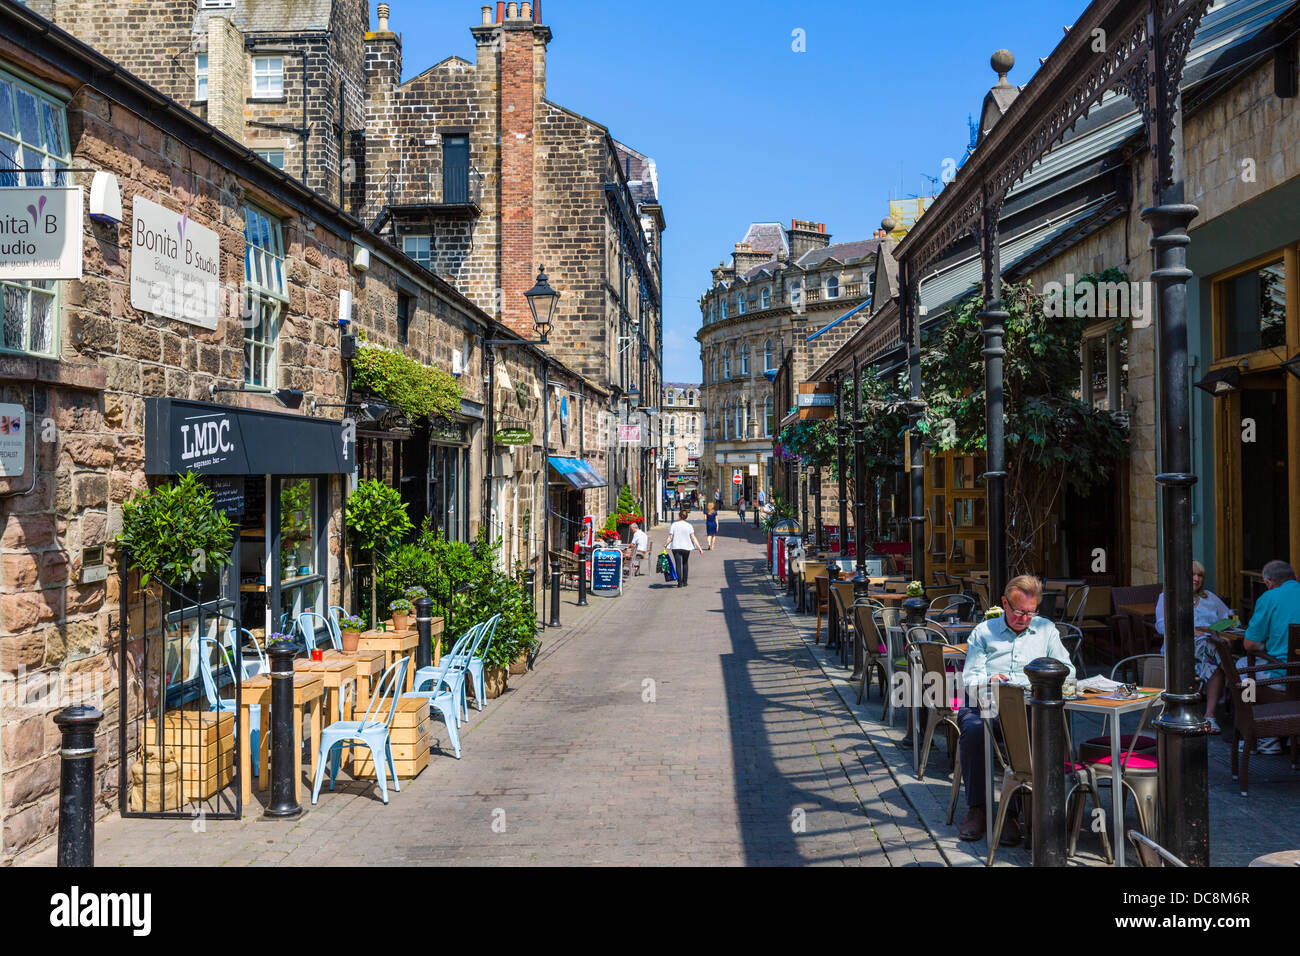 Cafes, bars and restaurants on John Street in the old town centre, Harrogate, North Yorkshire, England, UK Stock Photo